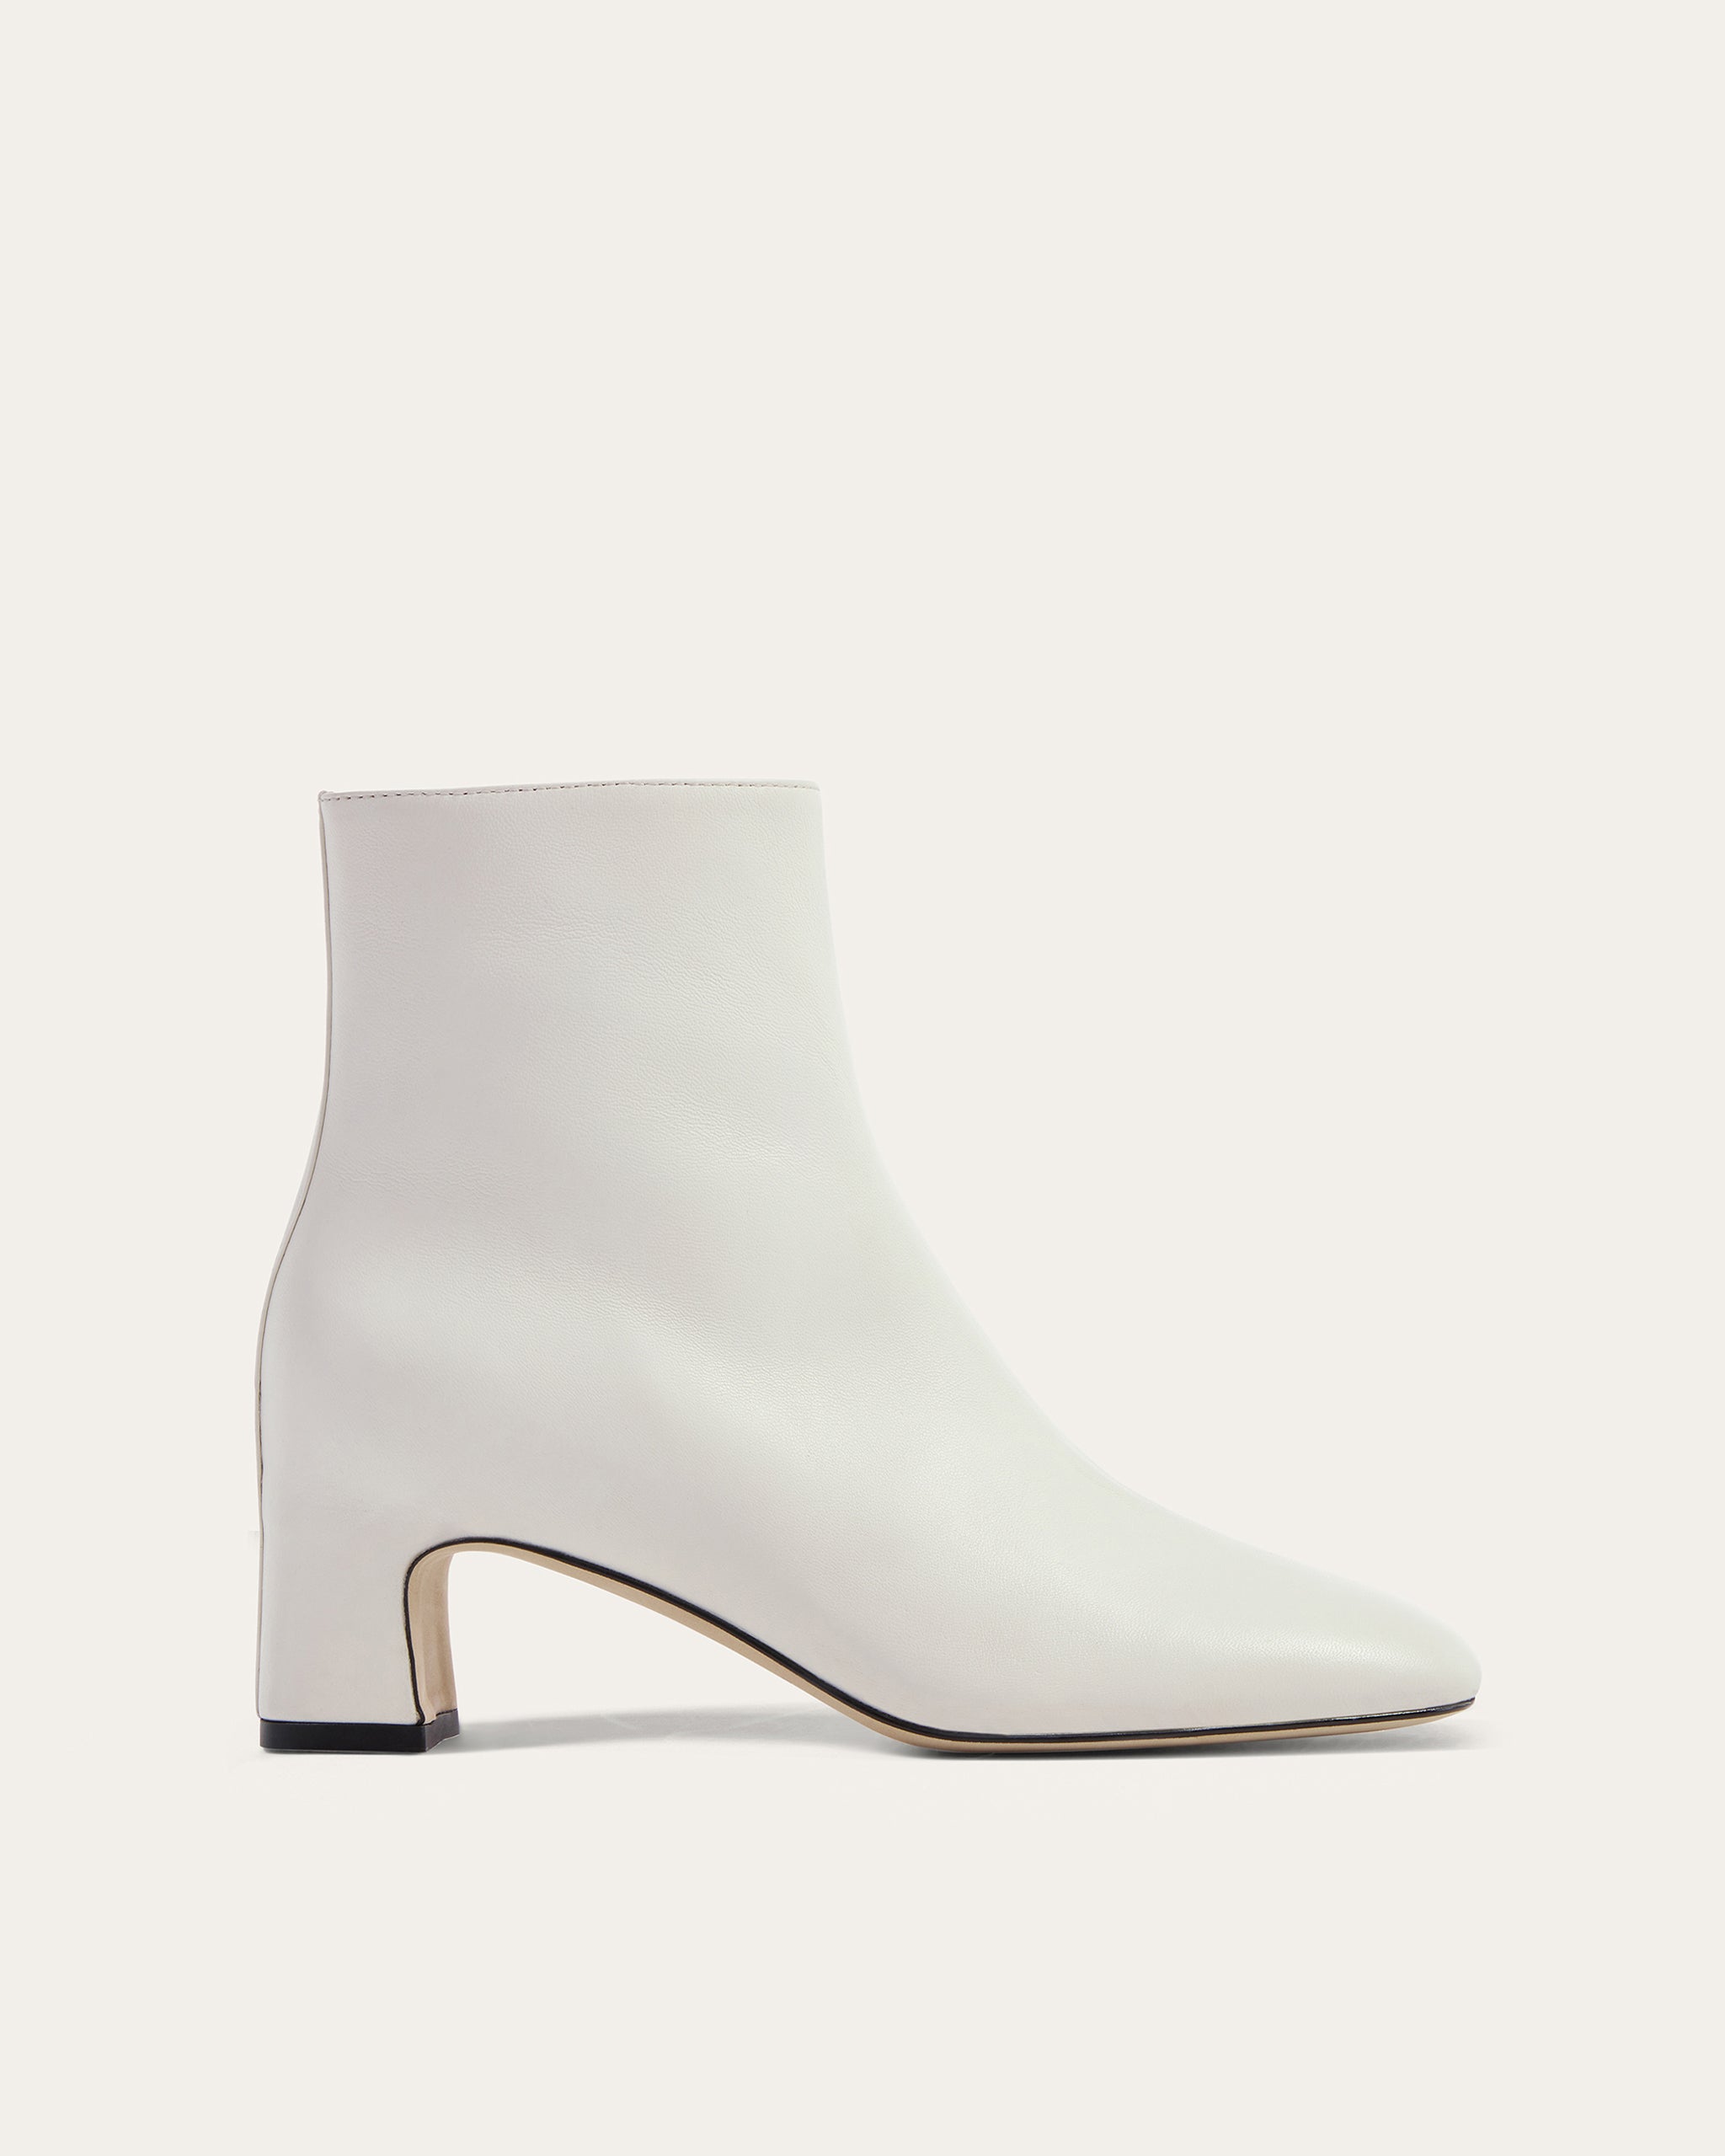 Image of Turin Boot, White